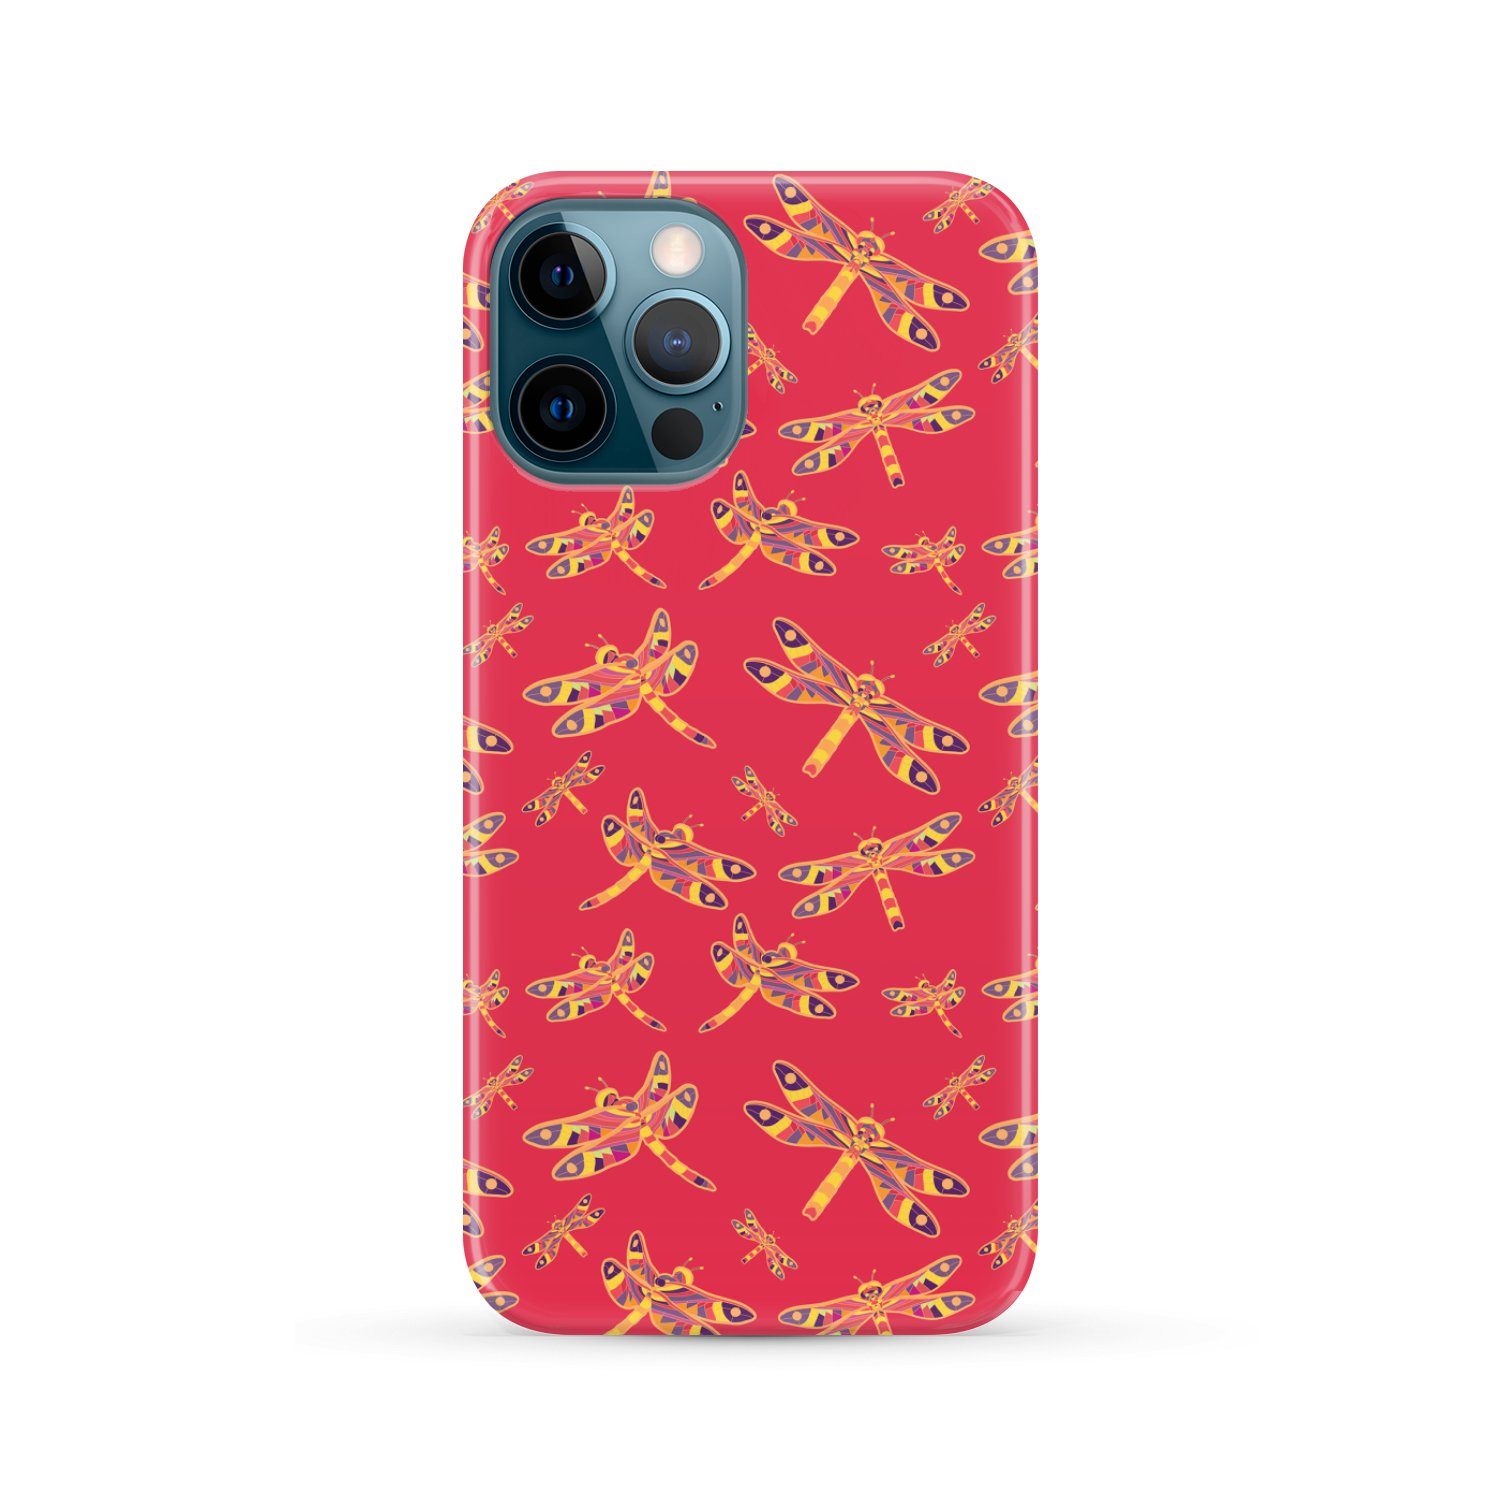 Gathering Rouge Phone Case Phone Case wc-fulfillment iPhone 12 Pro Max 